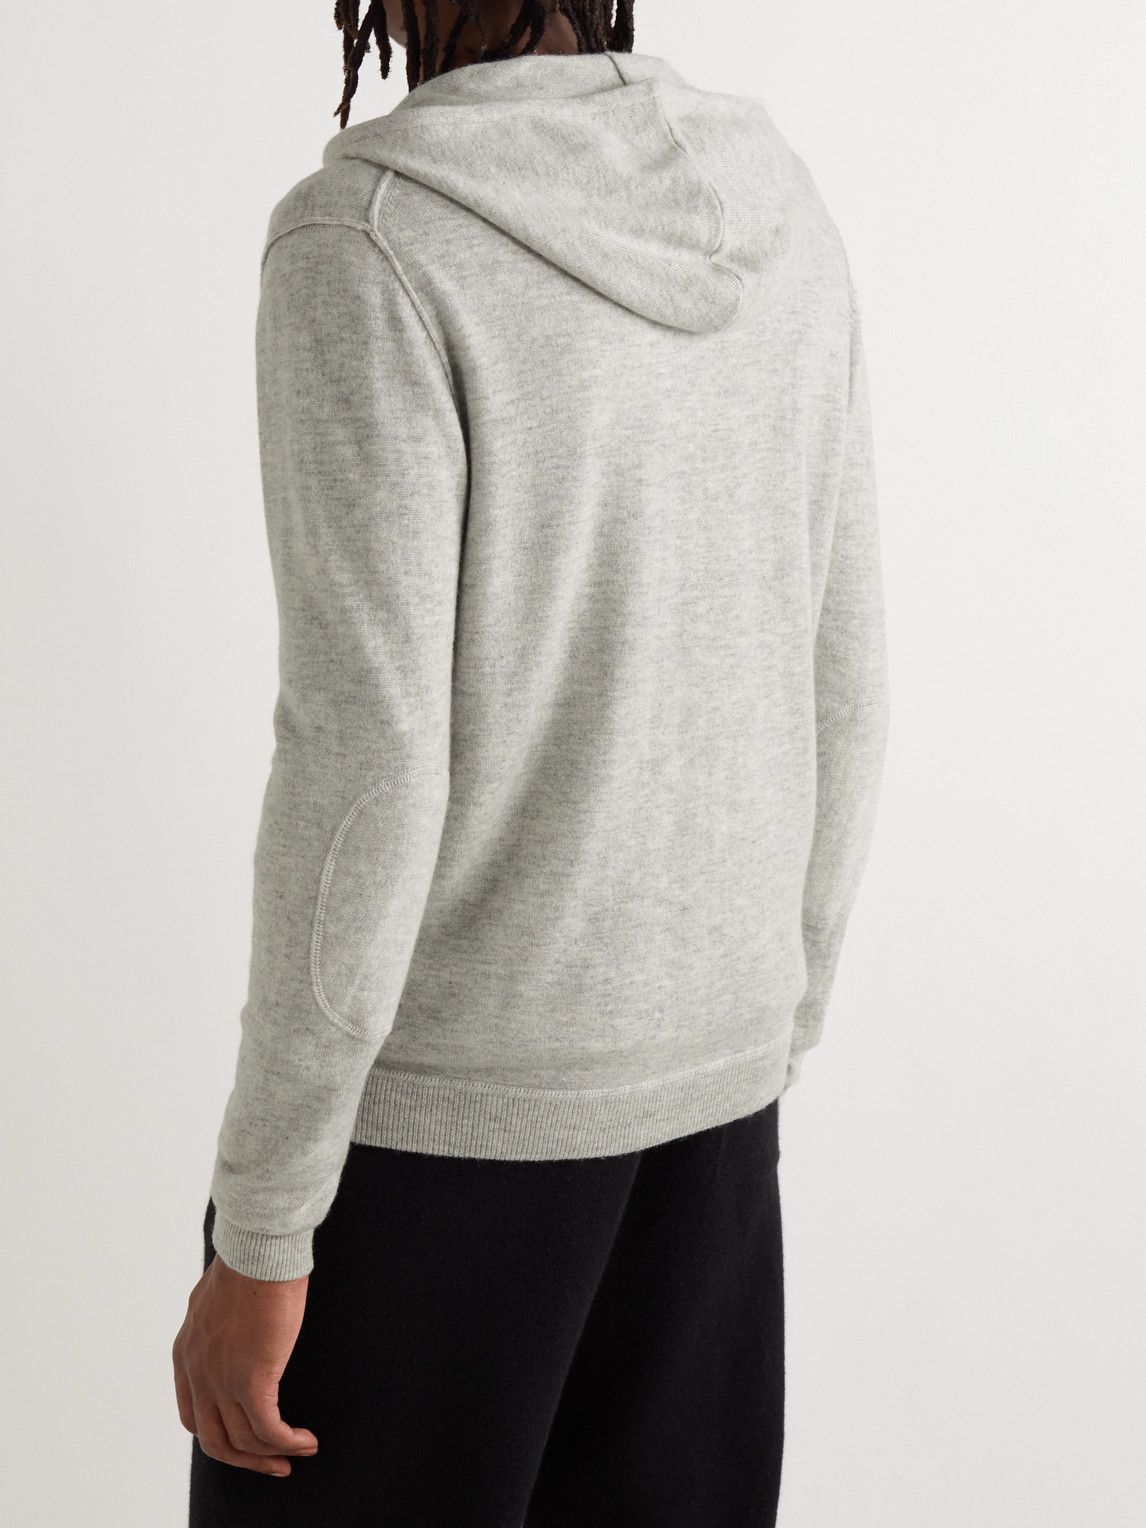 Allude - Virgin Wool and Cashmere Blend Zip-Up Hoodie - Gray